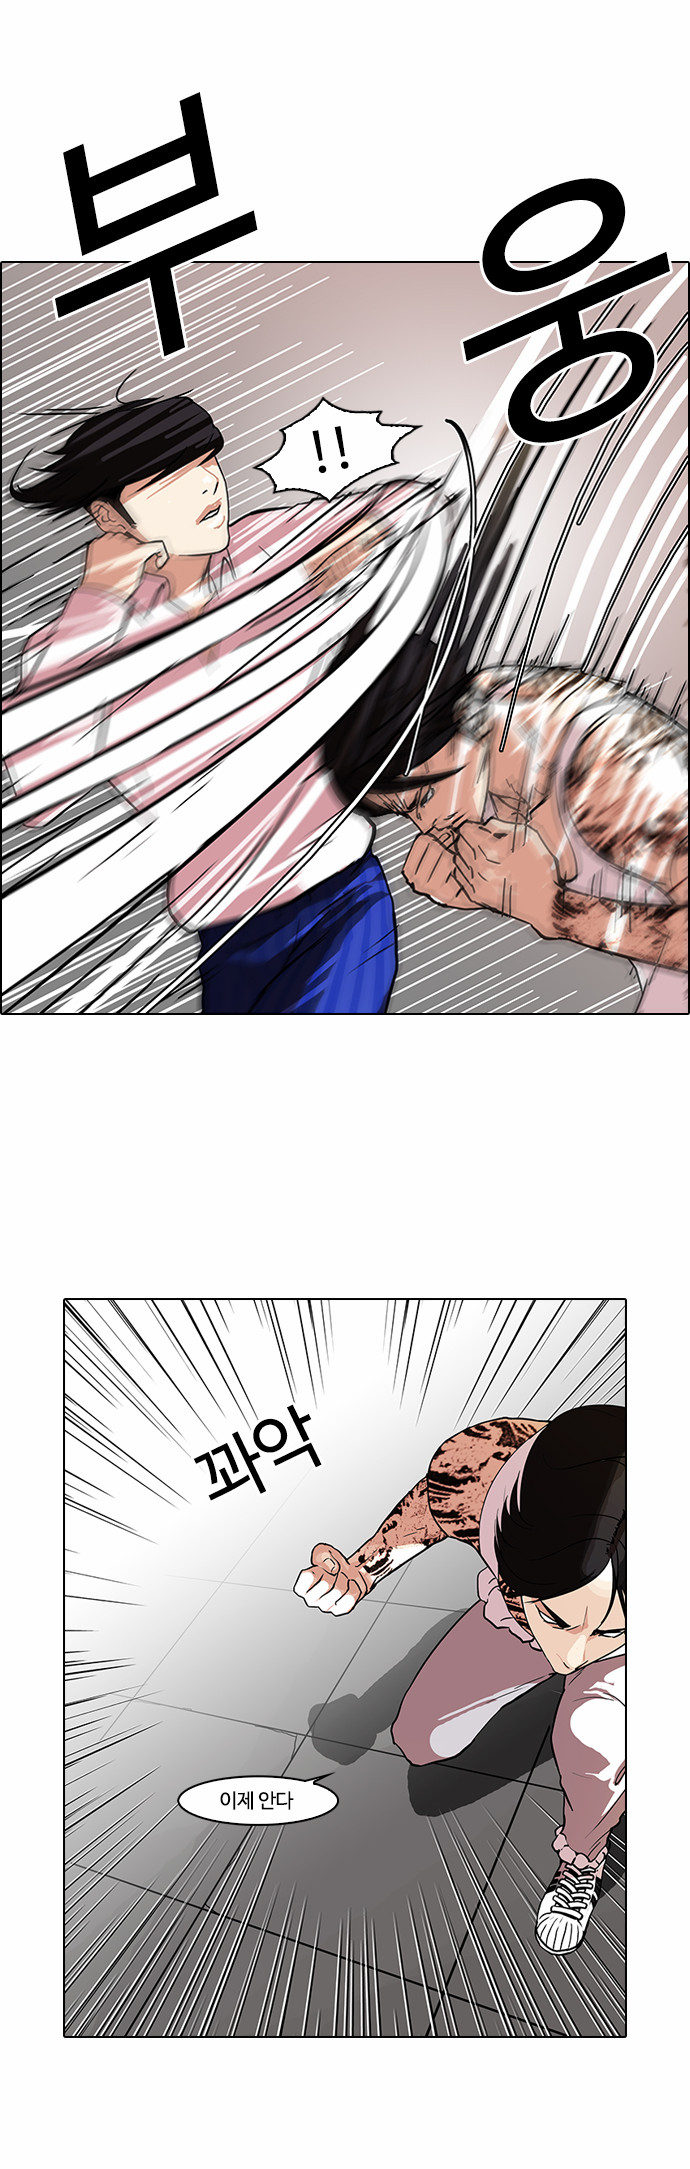 Lookism - Chapter 79 - Page 2